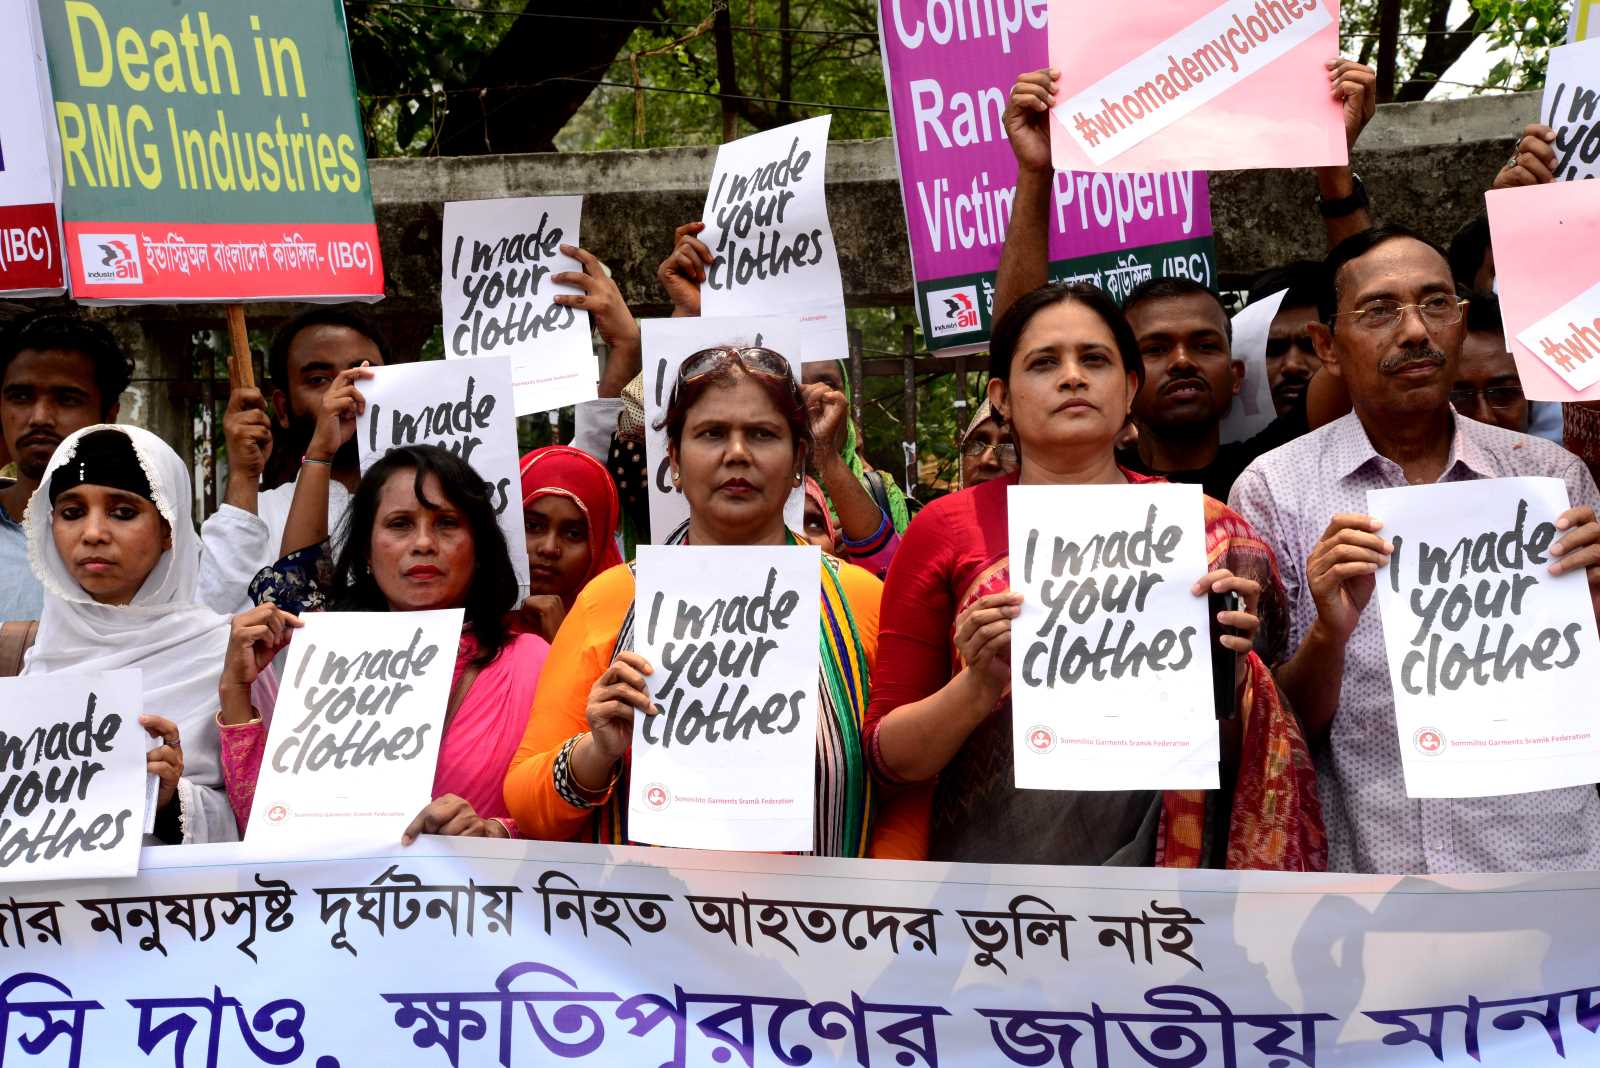 Work-place safety has improved: Nazma Akter (in red) taking part in a rally in Dhaka in 2019, commemorating the Rana Plaza disaster of 2013.